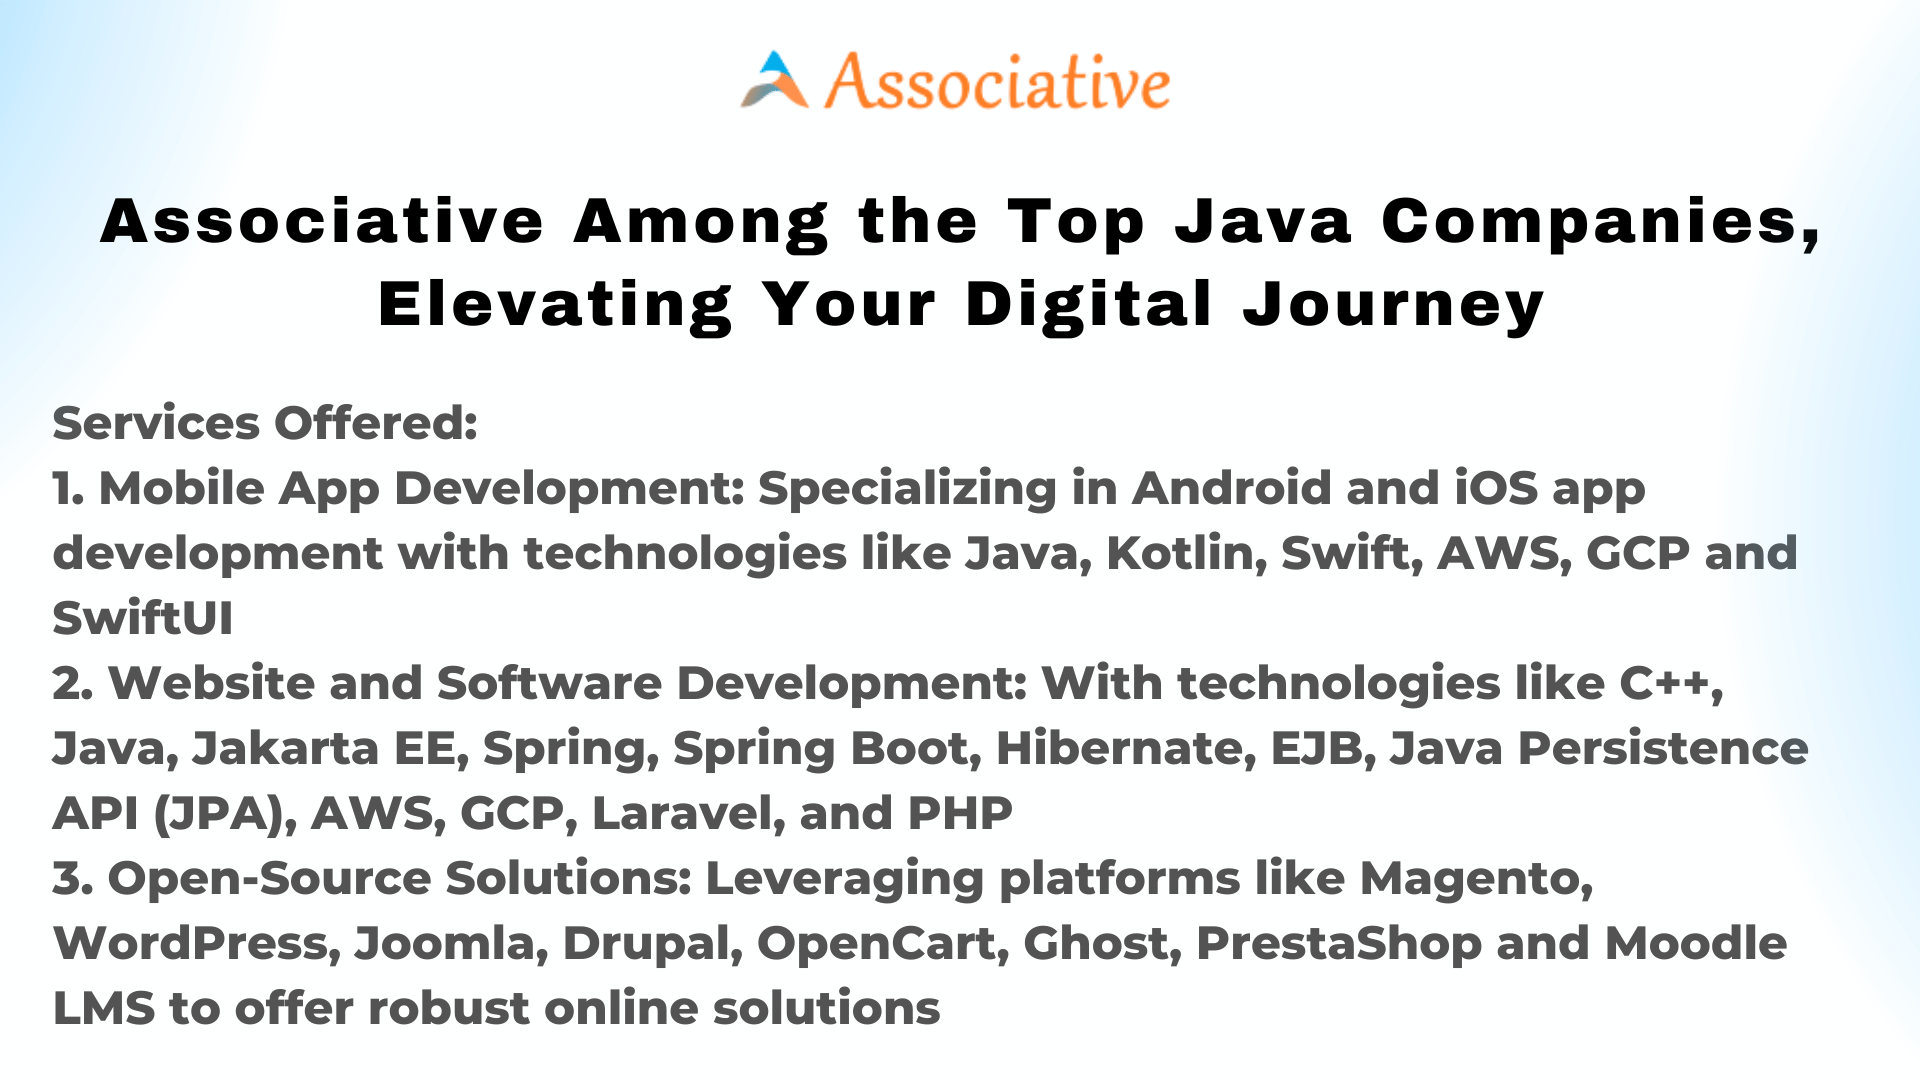 Associative Among the Top Java Companies, Elevating Your Digital Journey